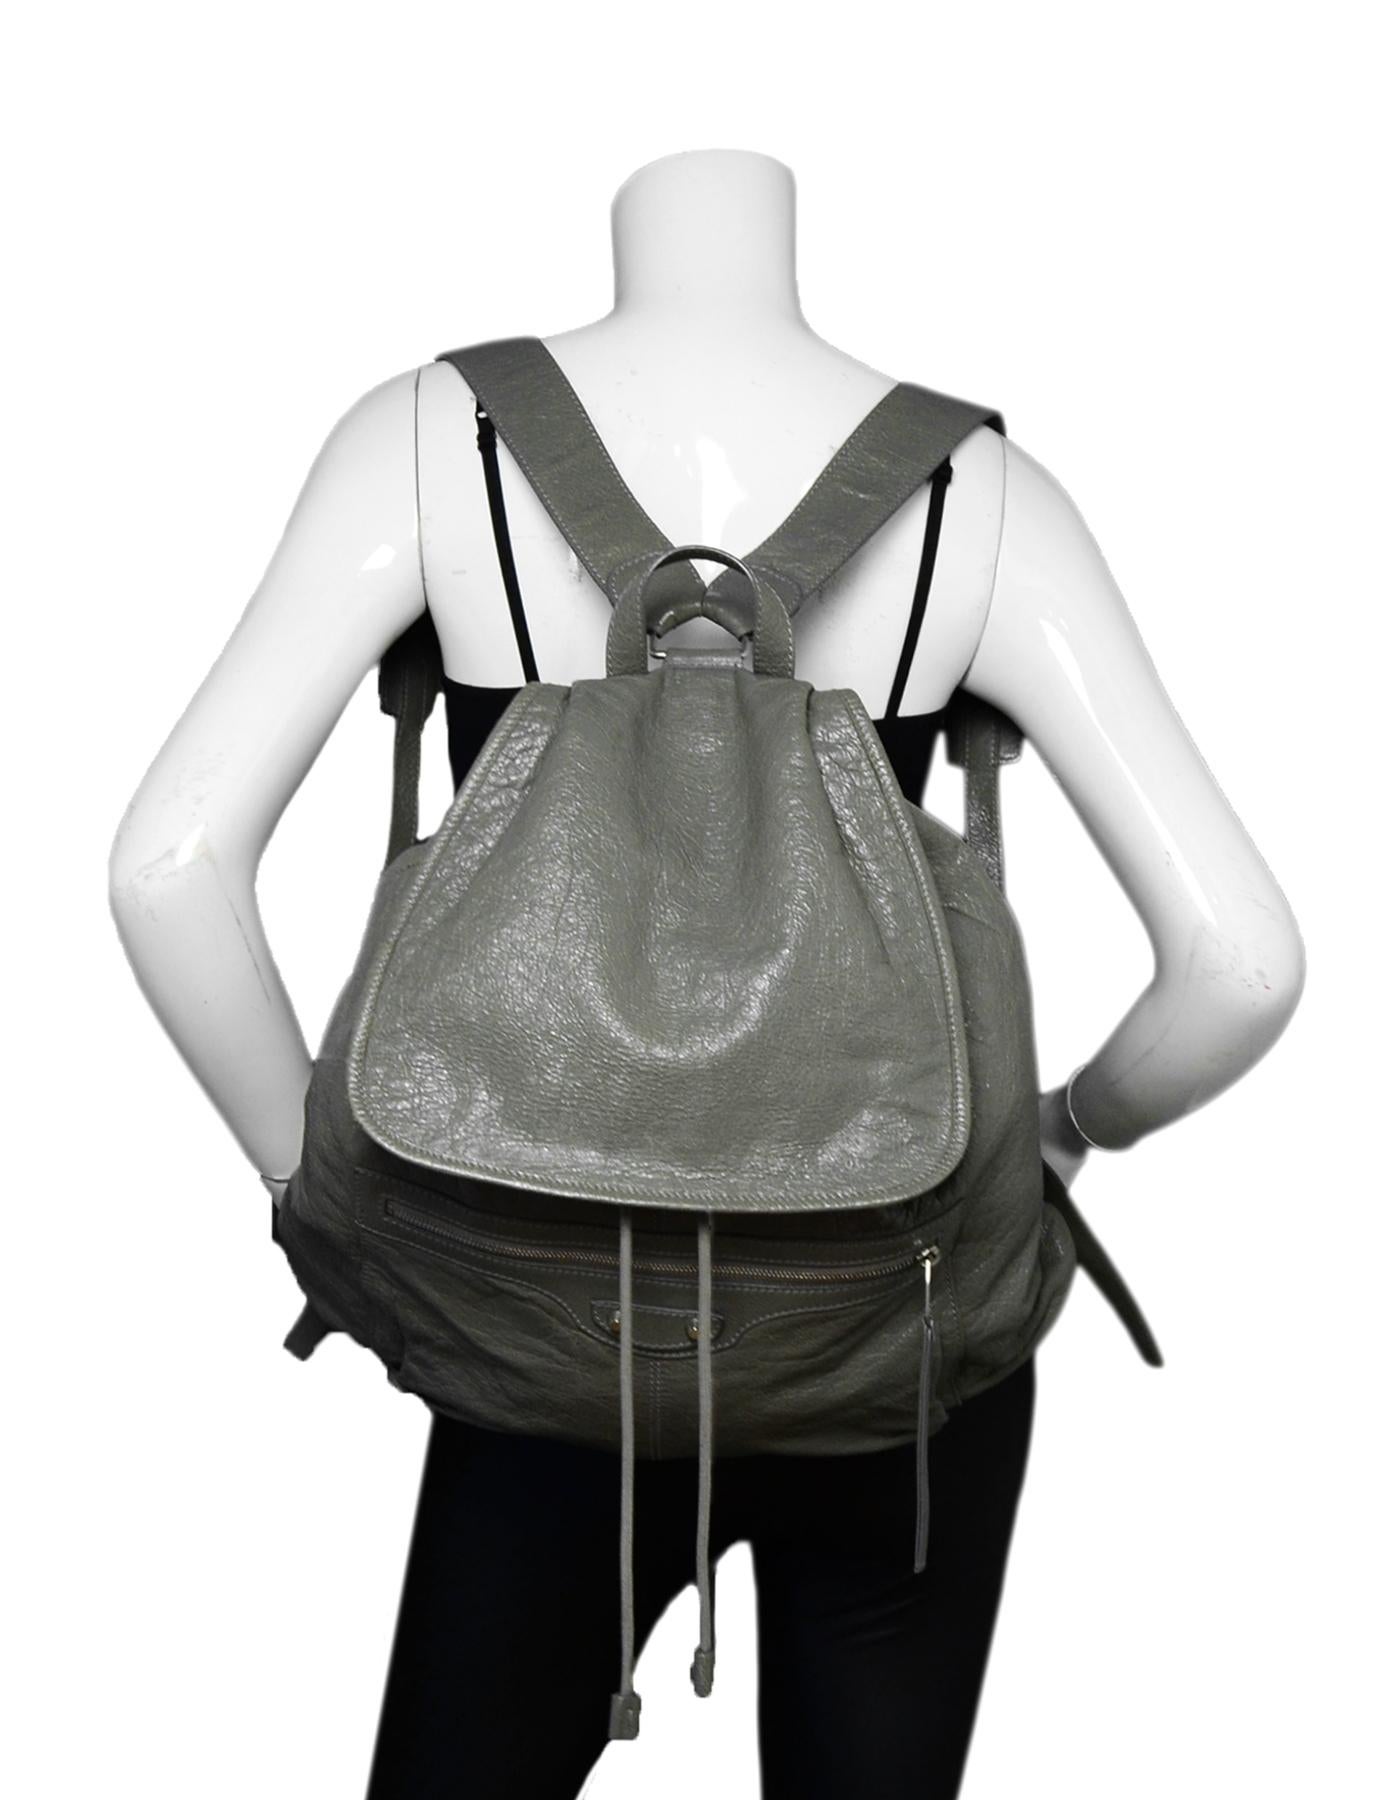 Balenciaga Grey Agneau Leather Classic Traveler S Backpack Bag  rt $1,615

Made In: Italy
Color: Grey
Hardware: Silvertone hardware
Materials: Leather
Lining: Black textile lining
Closure/Opening: Top flap with buckle closure
Exterior Pockets: One